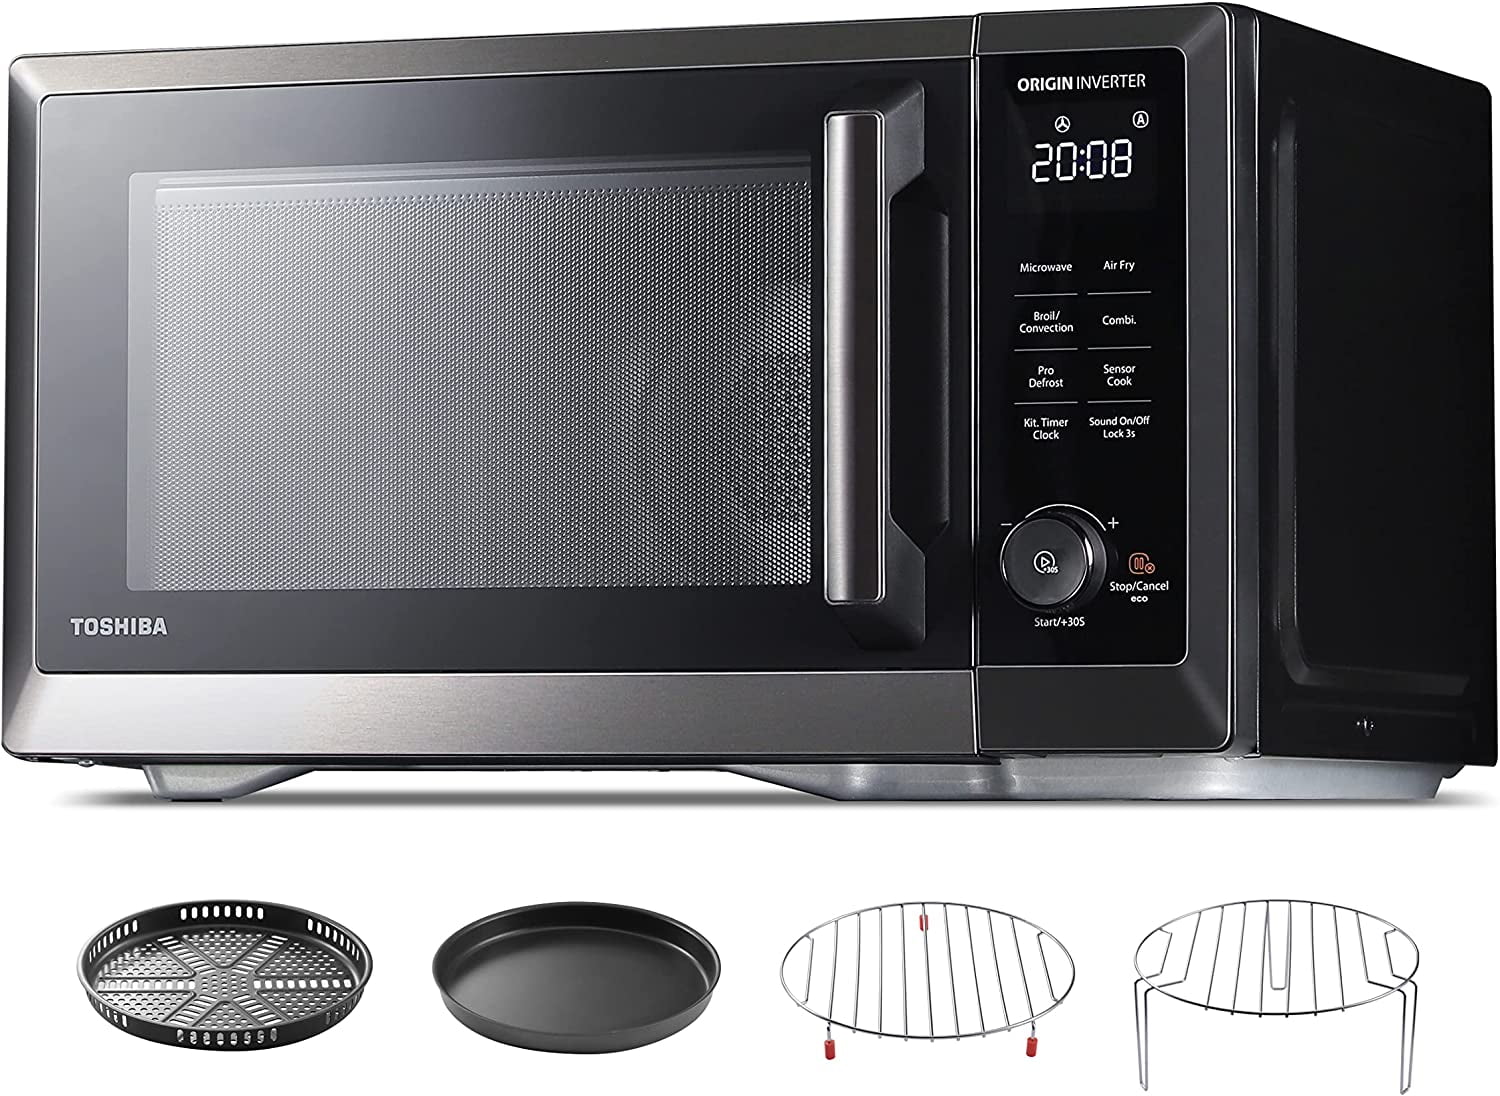 Toaster Ovens vs. Microwaves: Which is Better?